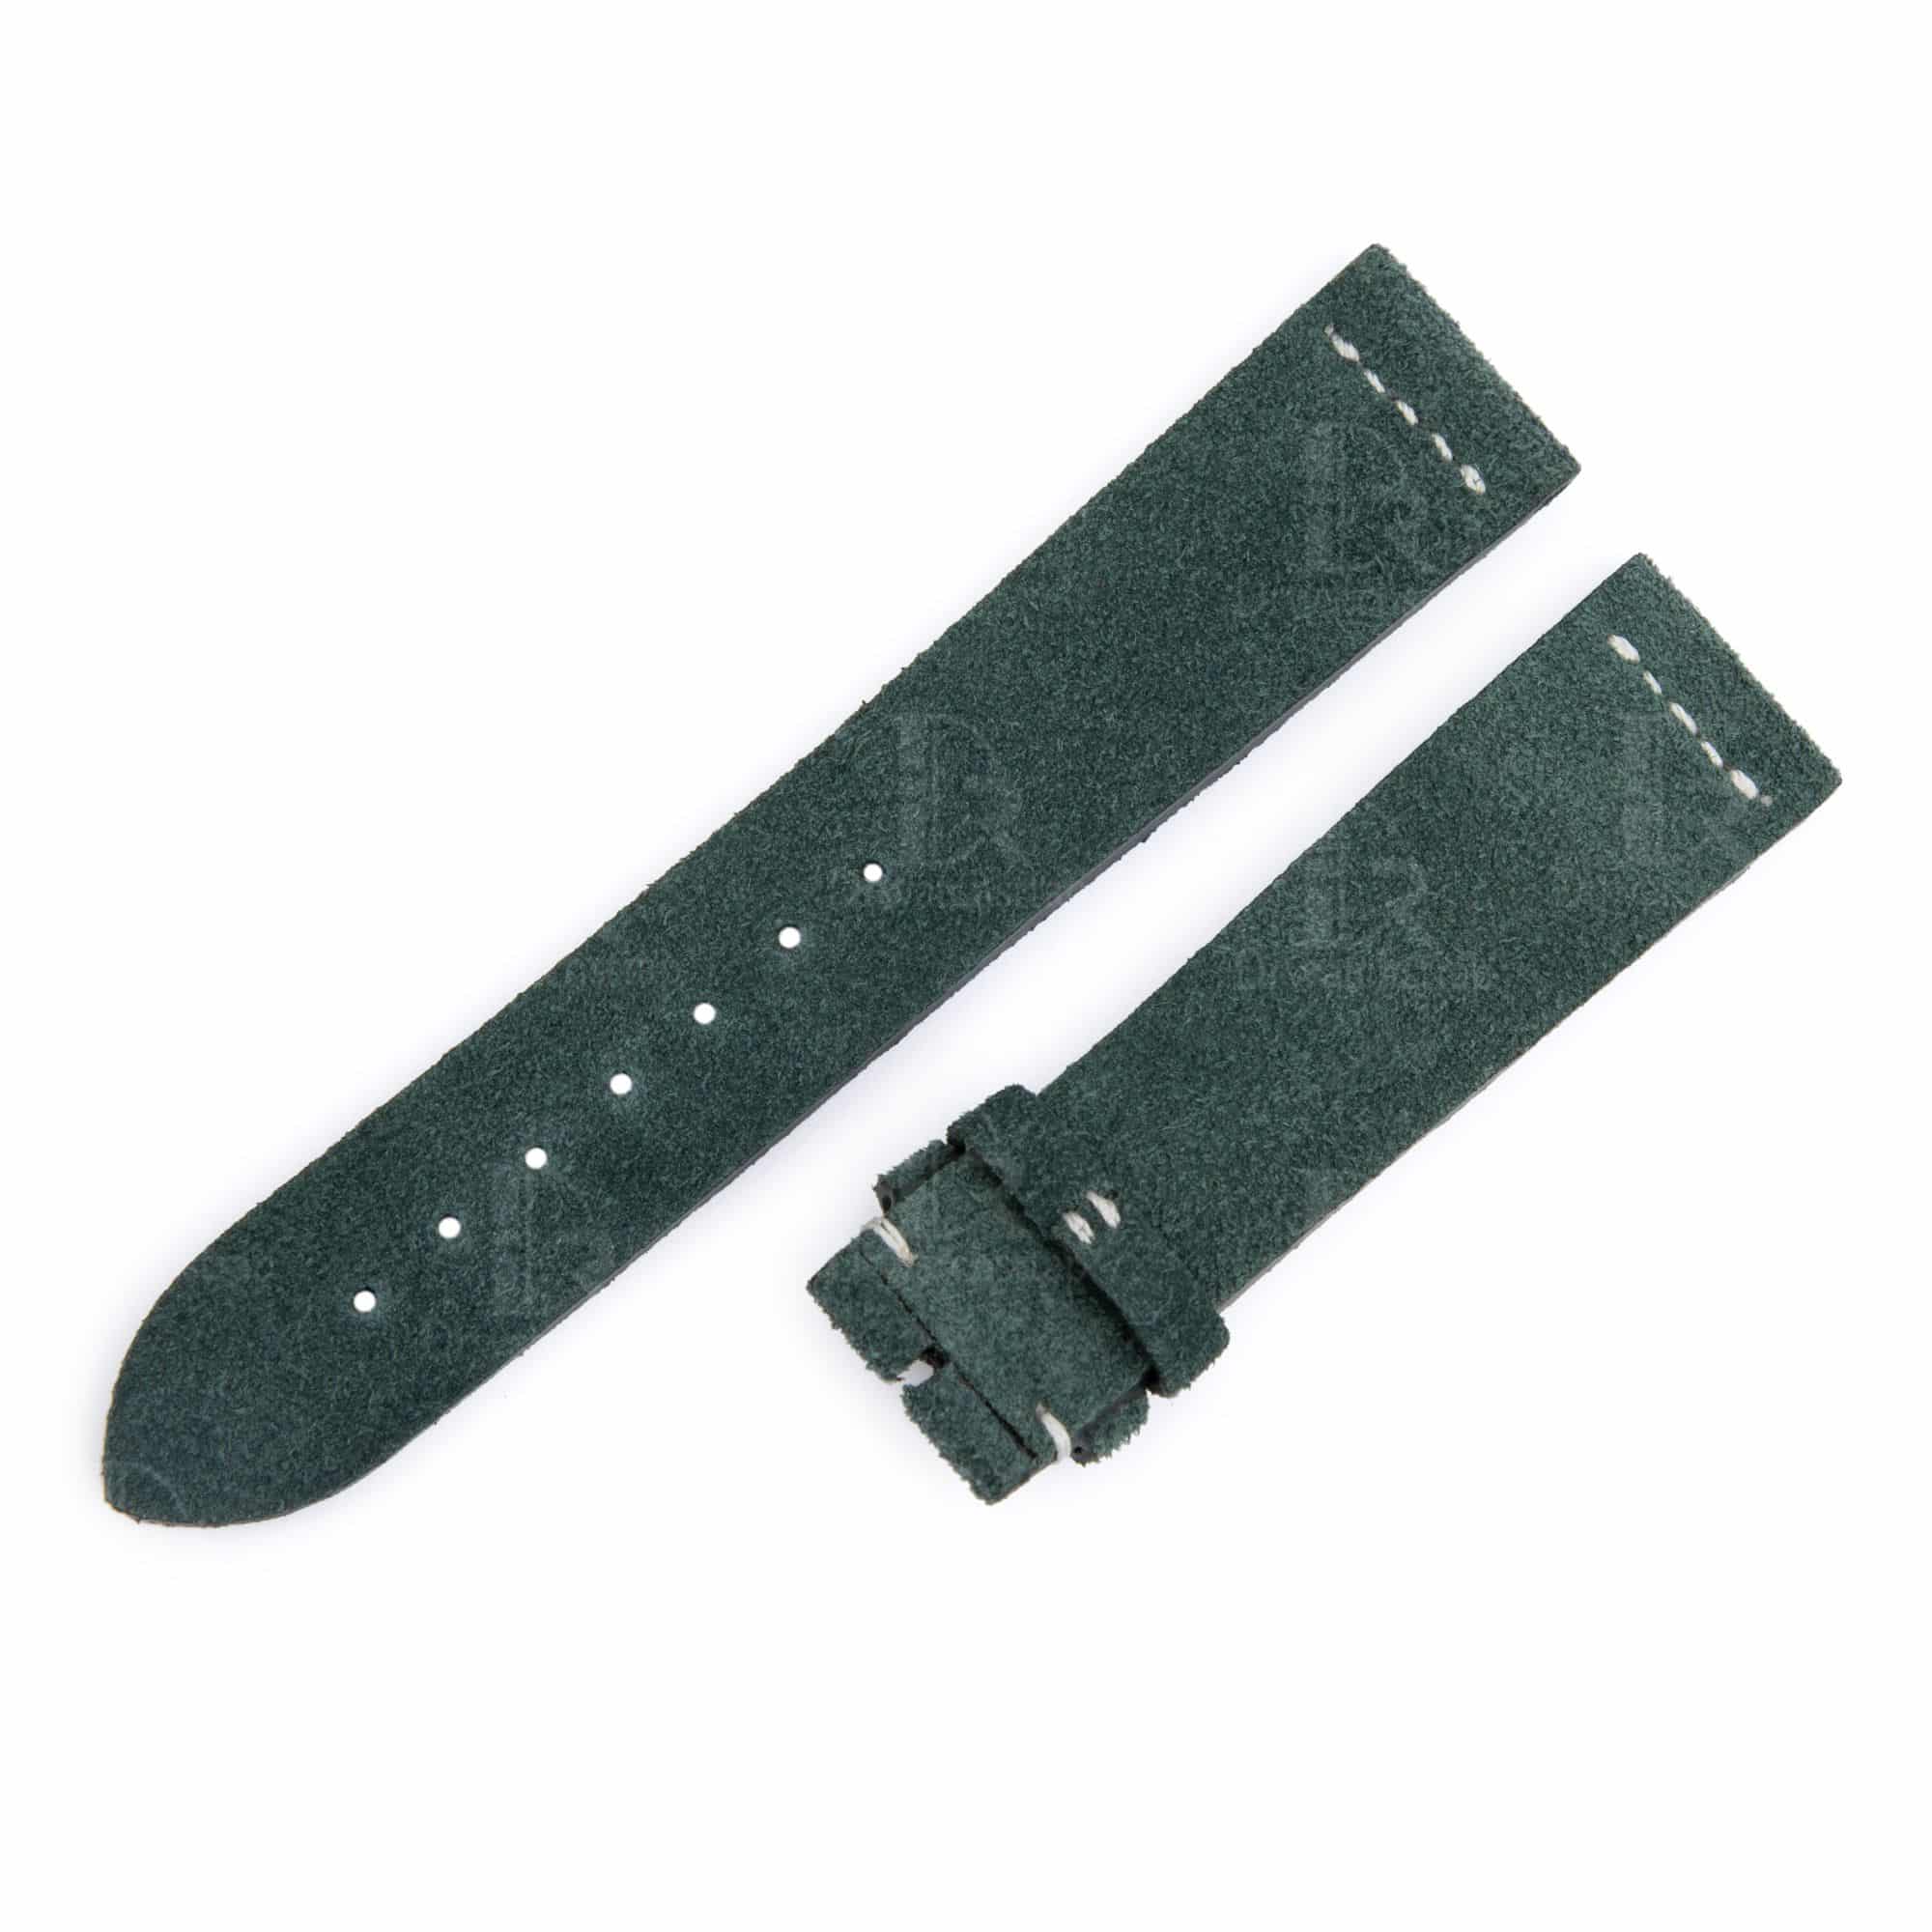 Custom best quality OEM vintage green old Suede Rolex leather strap and watch band with 20mm lug size for Rolex green Submariner, Datejust, Day-date, Sky-Dweller and other watches - Shop the premium aftermarket straps online at a low price